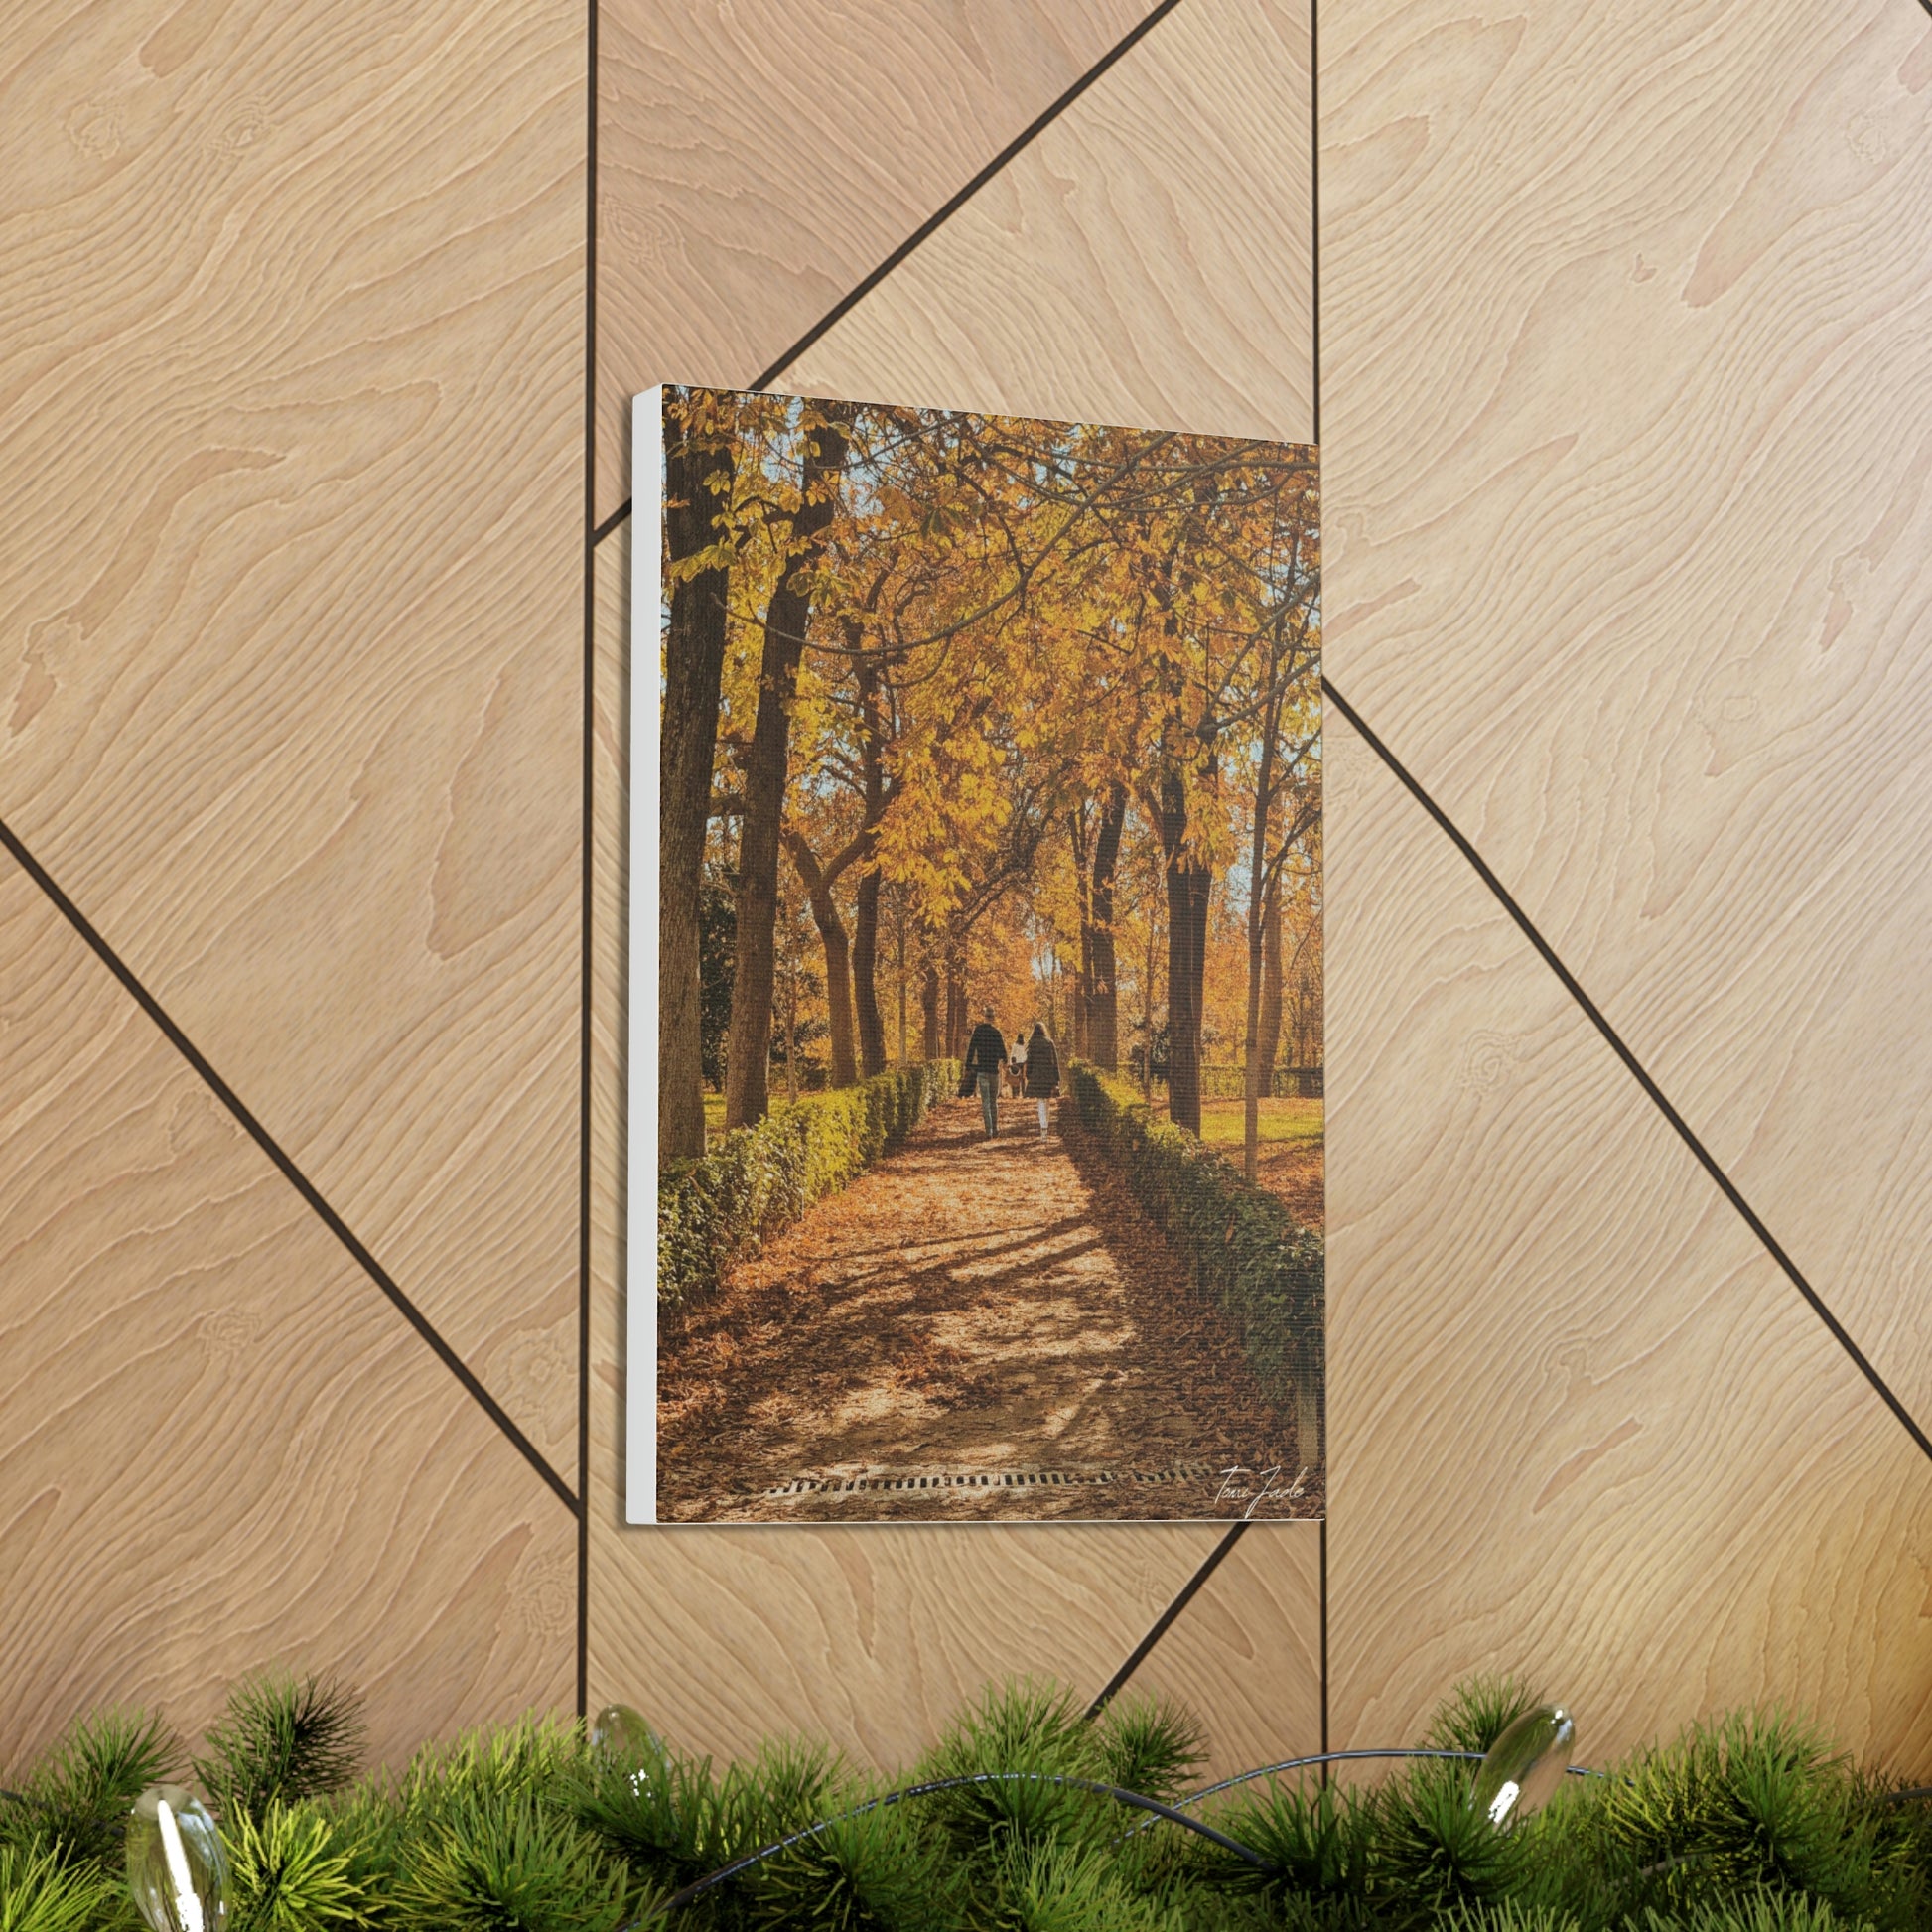 Our fall wall art in Spain is very colorful and vibrant. A couple is walking on the park trail with other families in front, the bright yellow leaves surrounding them.